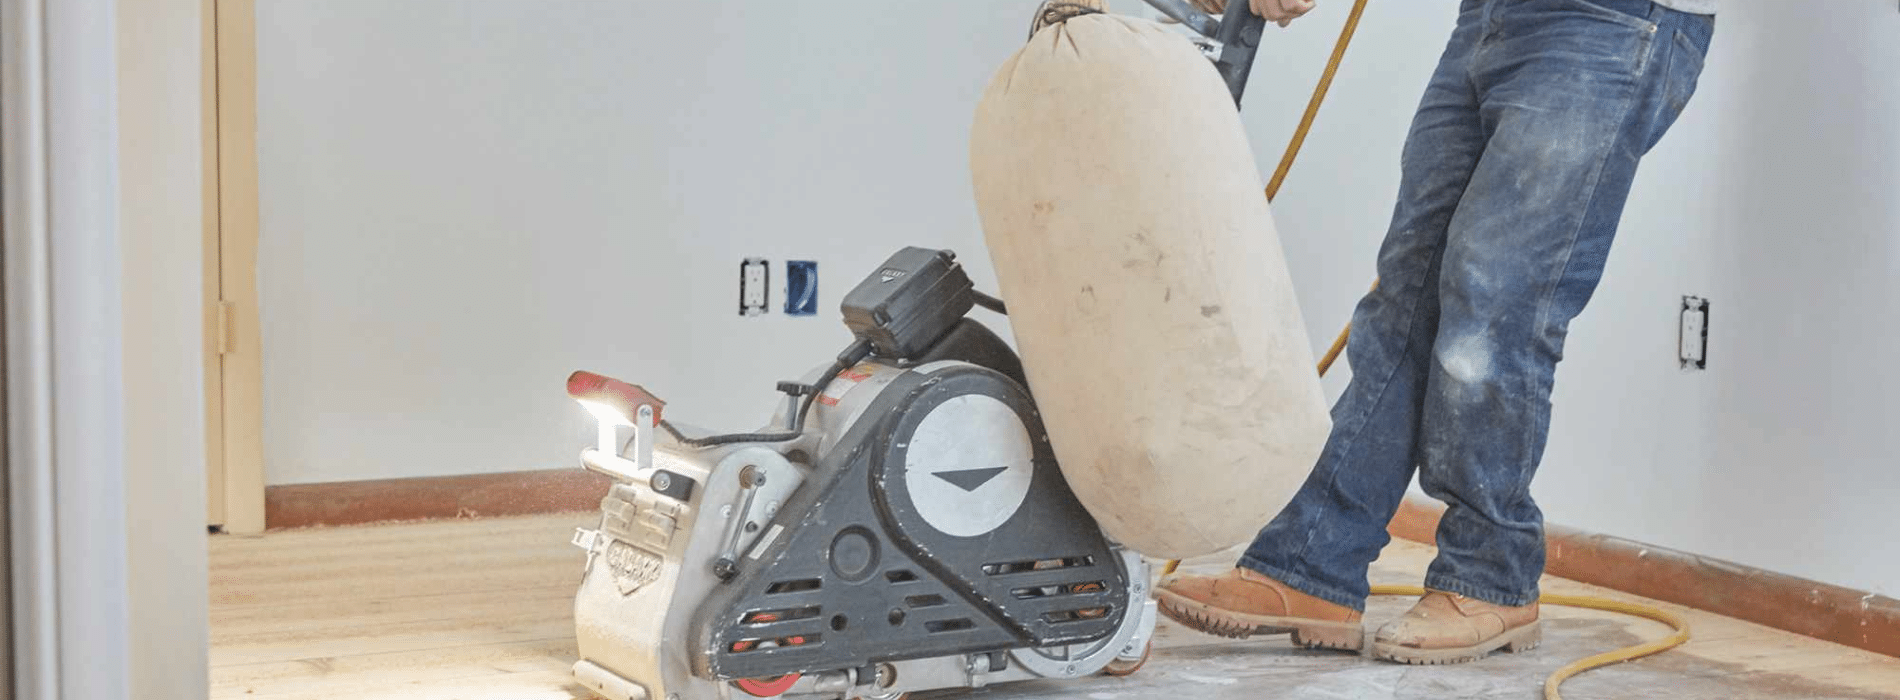 Mr Sander® use a Bona Scorpion drum sander with a dimension of 200mm, 1.5 kW effect, 240V voltage, and 50Hz frequency in Whitton, TW2. This powerful equipment is connected to a dust extraction system with a HEPA filter, ensuring a clean and efficient sanding.